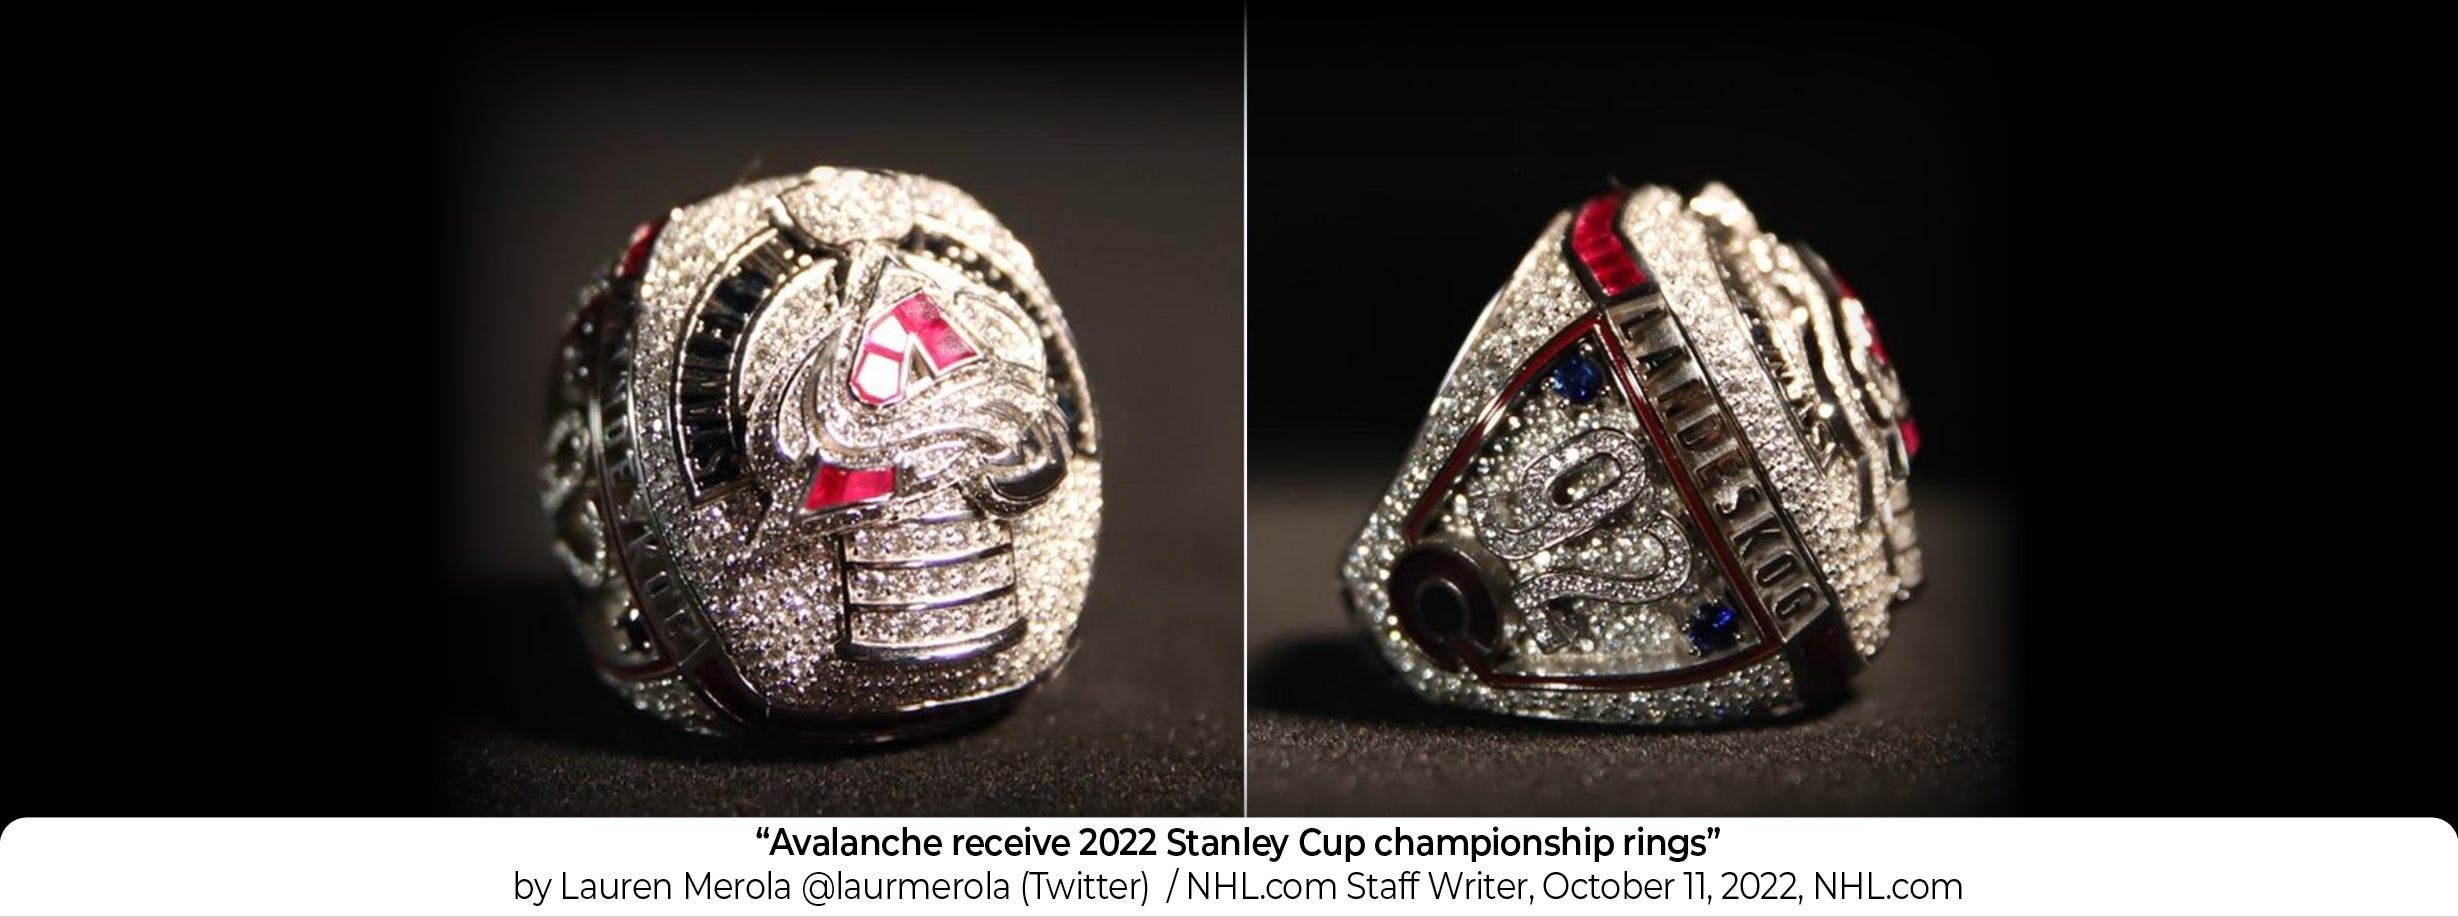 Want to know more about the rings being presented?